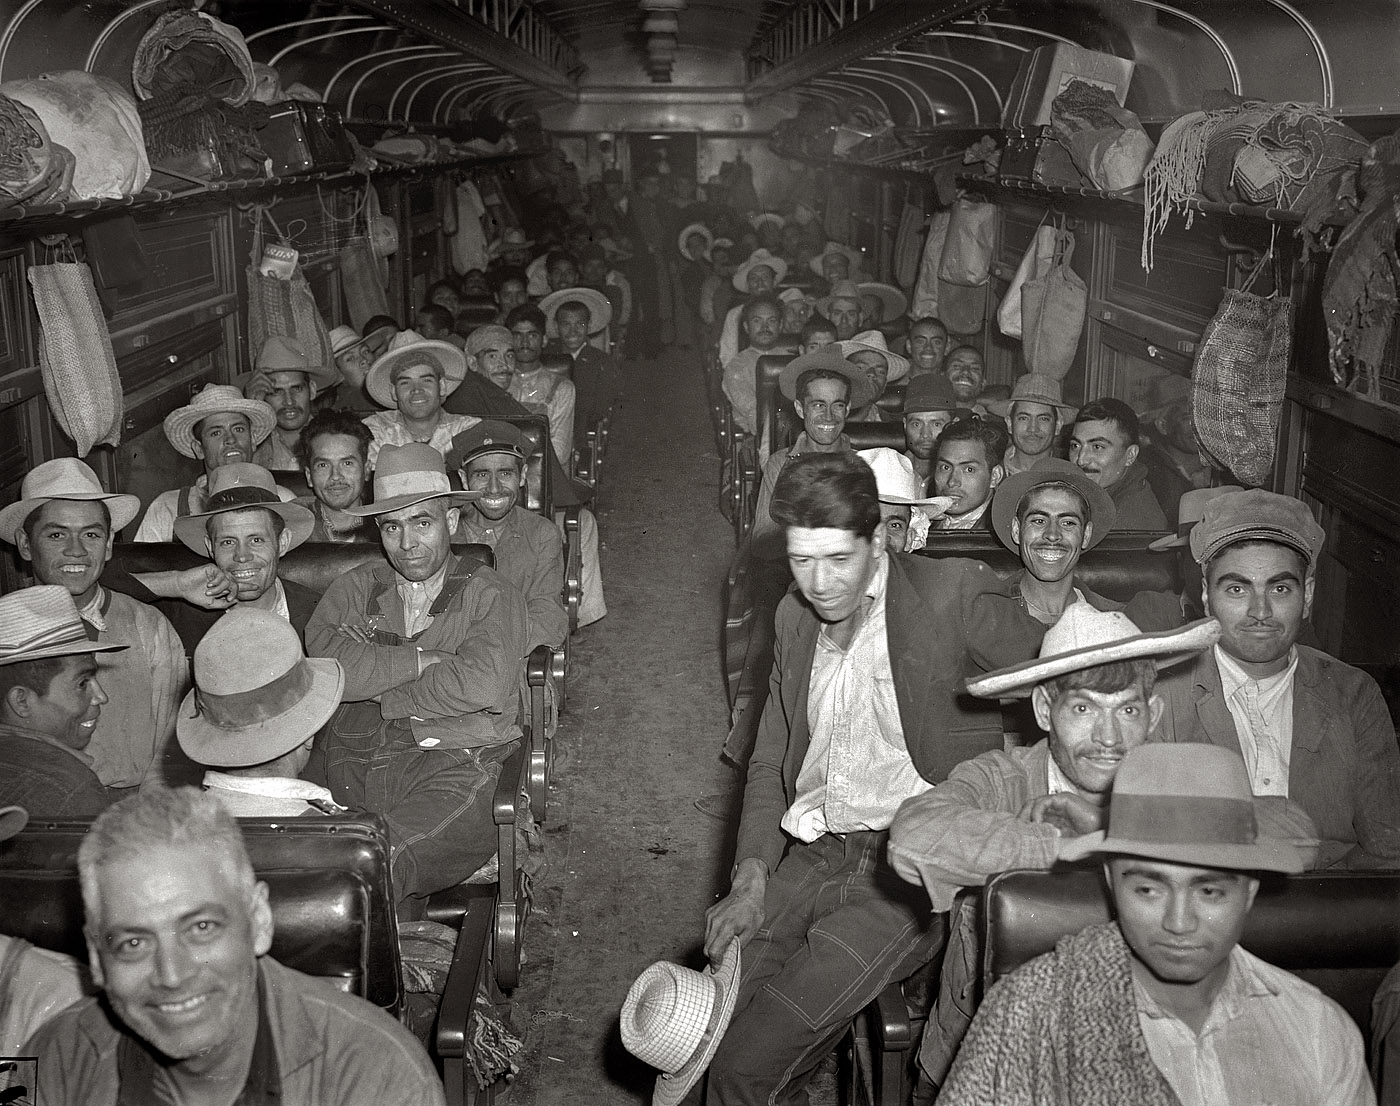 May 1943. More Mexican sugar-beet pickers headed north. "Mexican workers recruited and brought to the Arkansas valley, Colorado, Nebraska and Minnesota by the FSA to harvest sugar beets." View full size. Office of War Information.